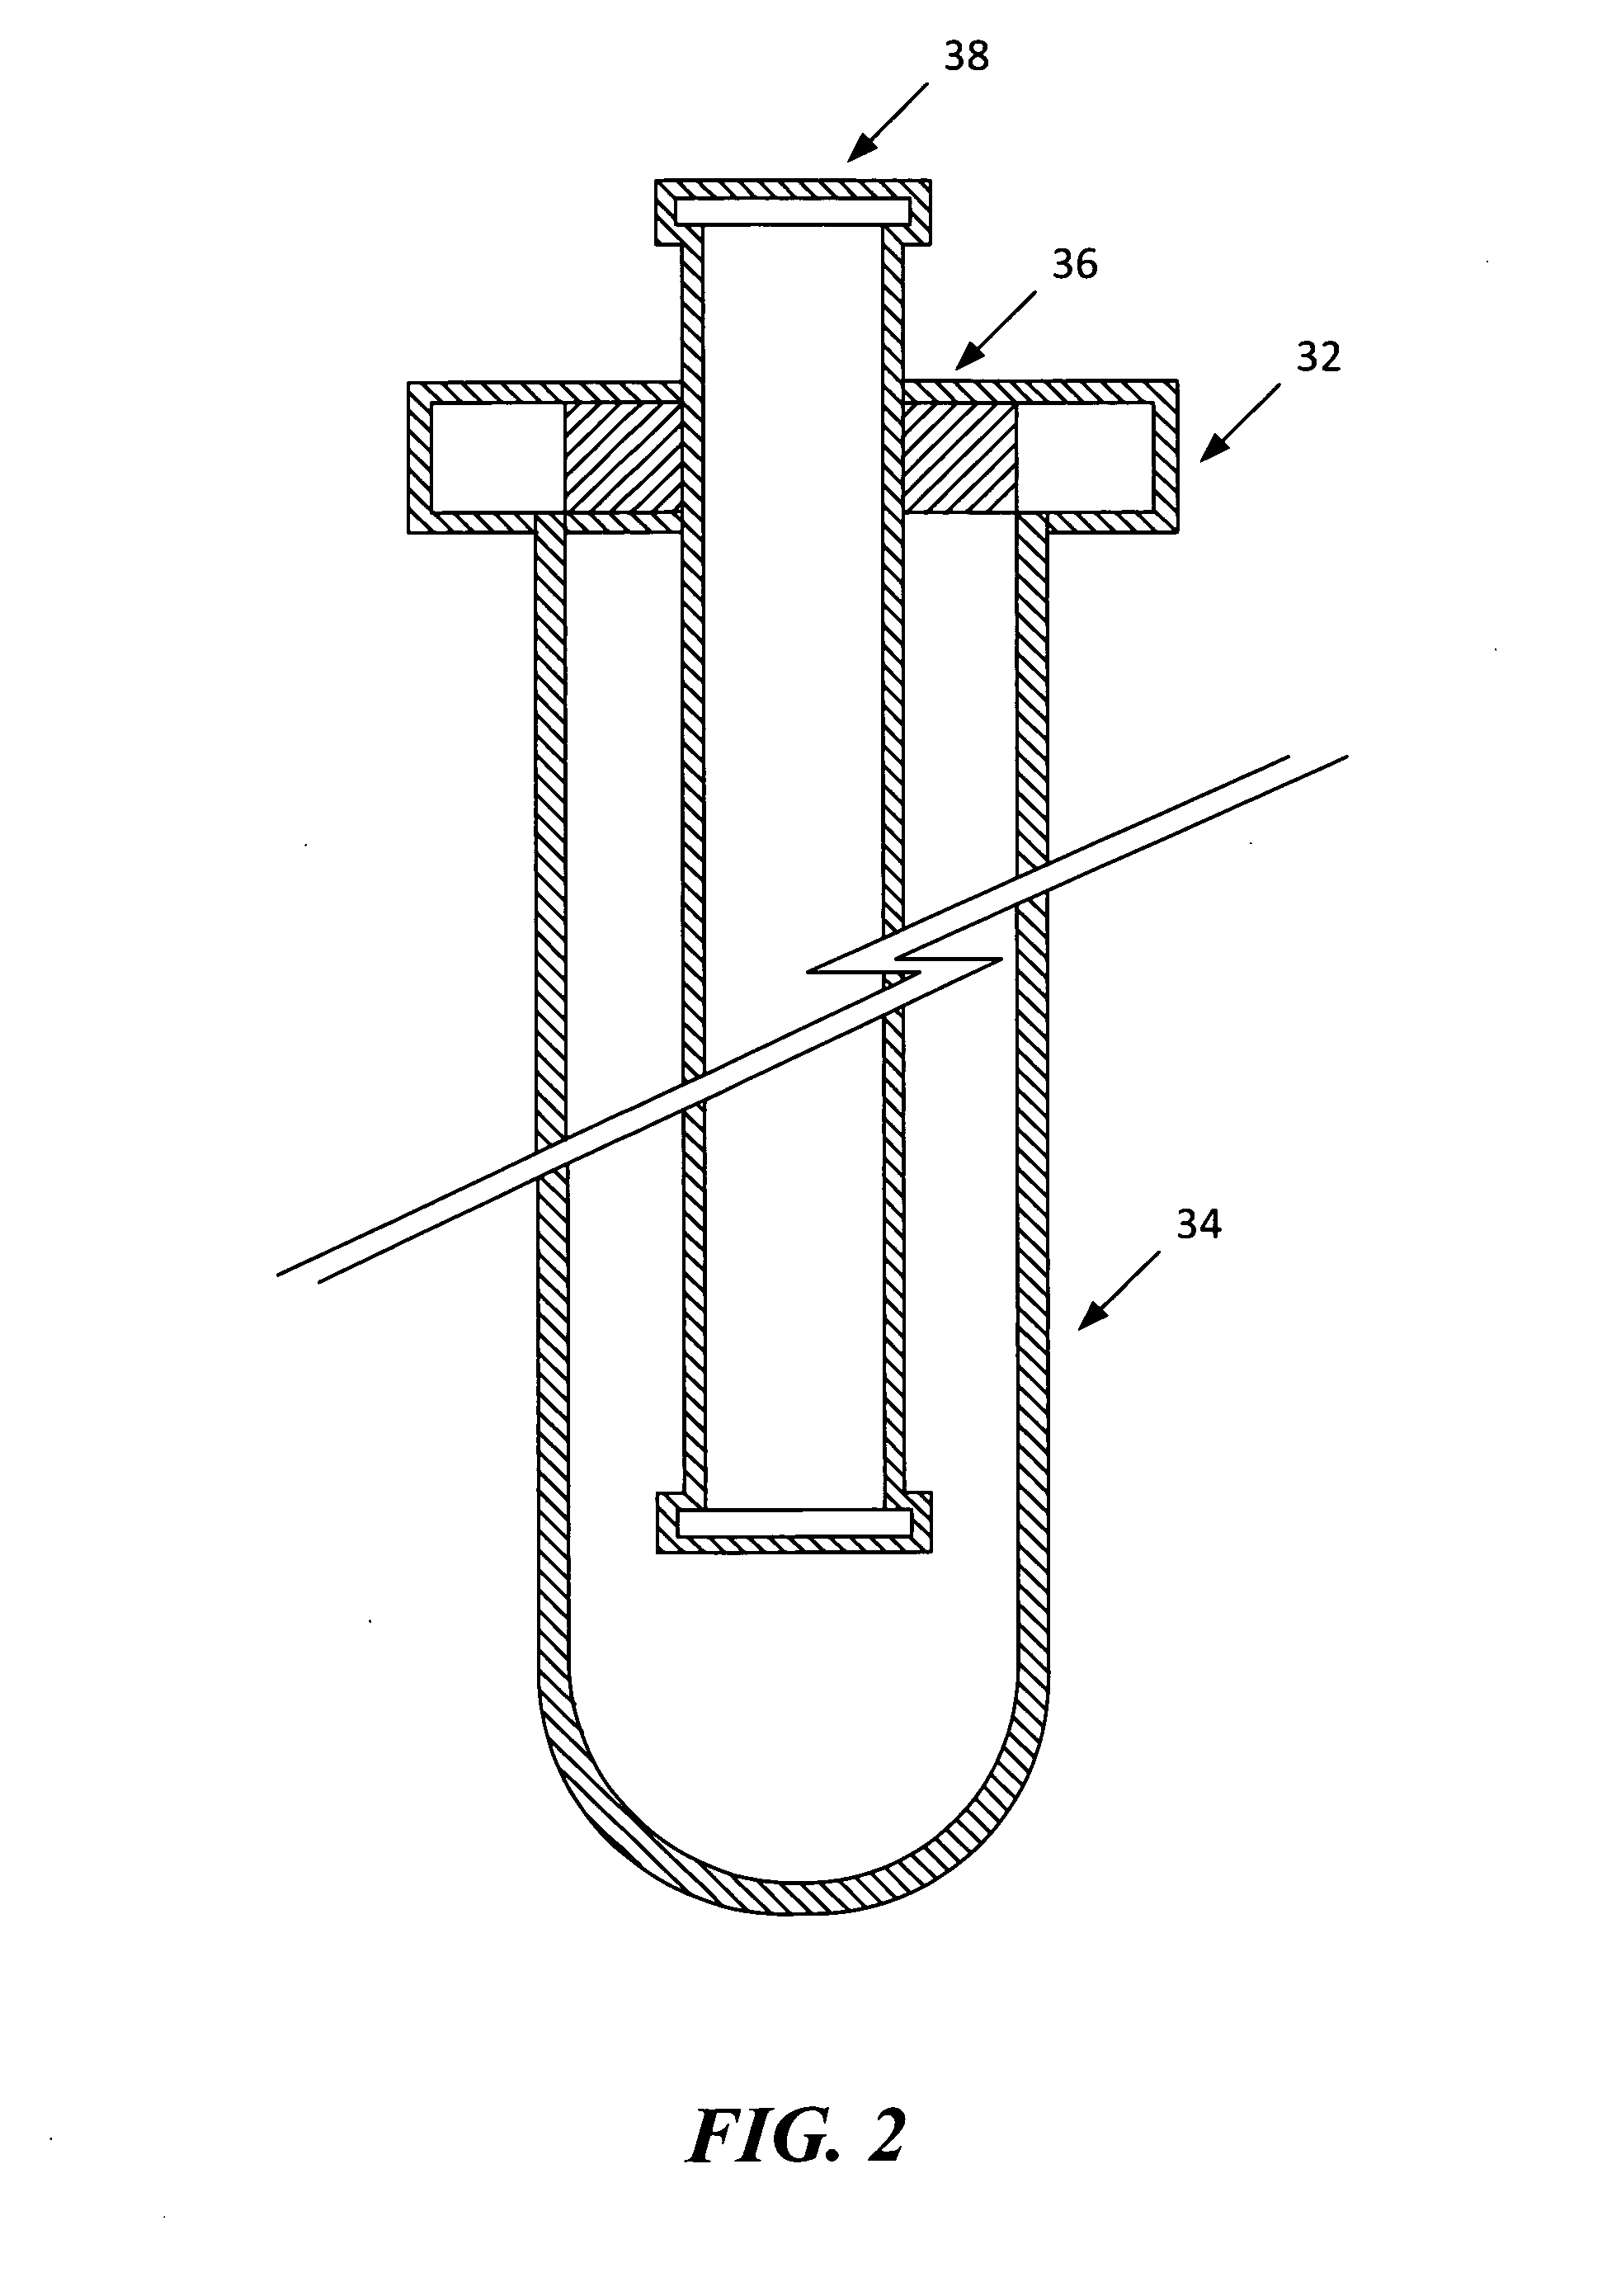 Water Purification Device